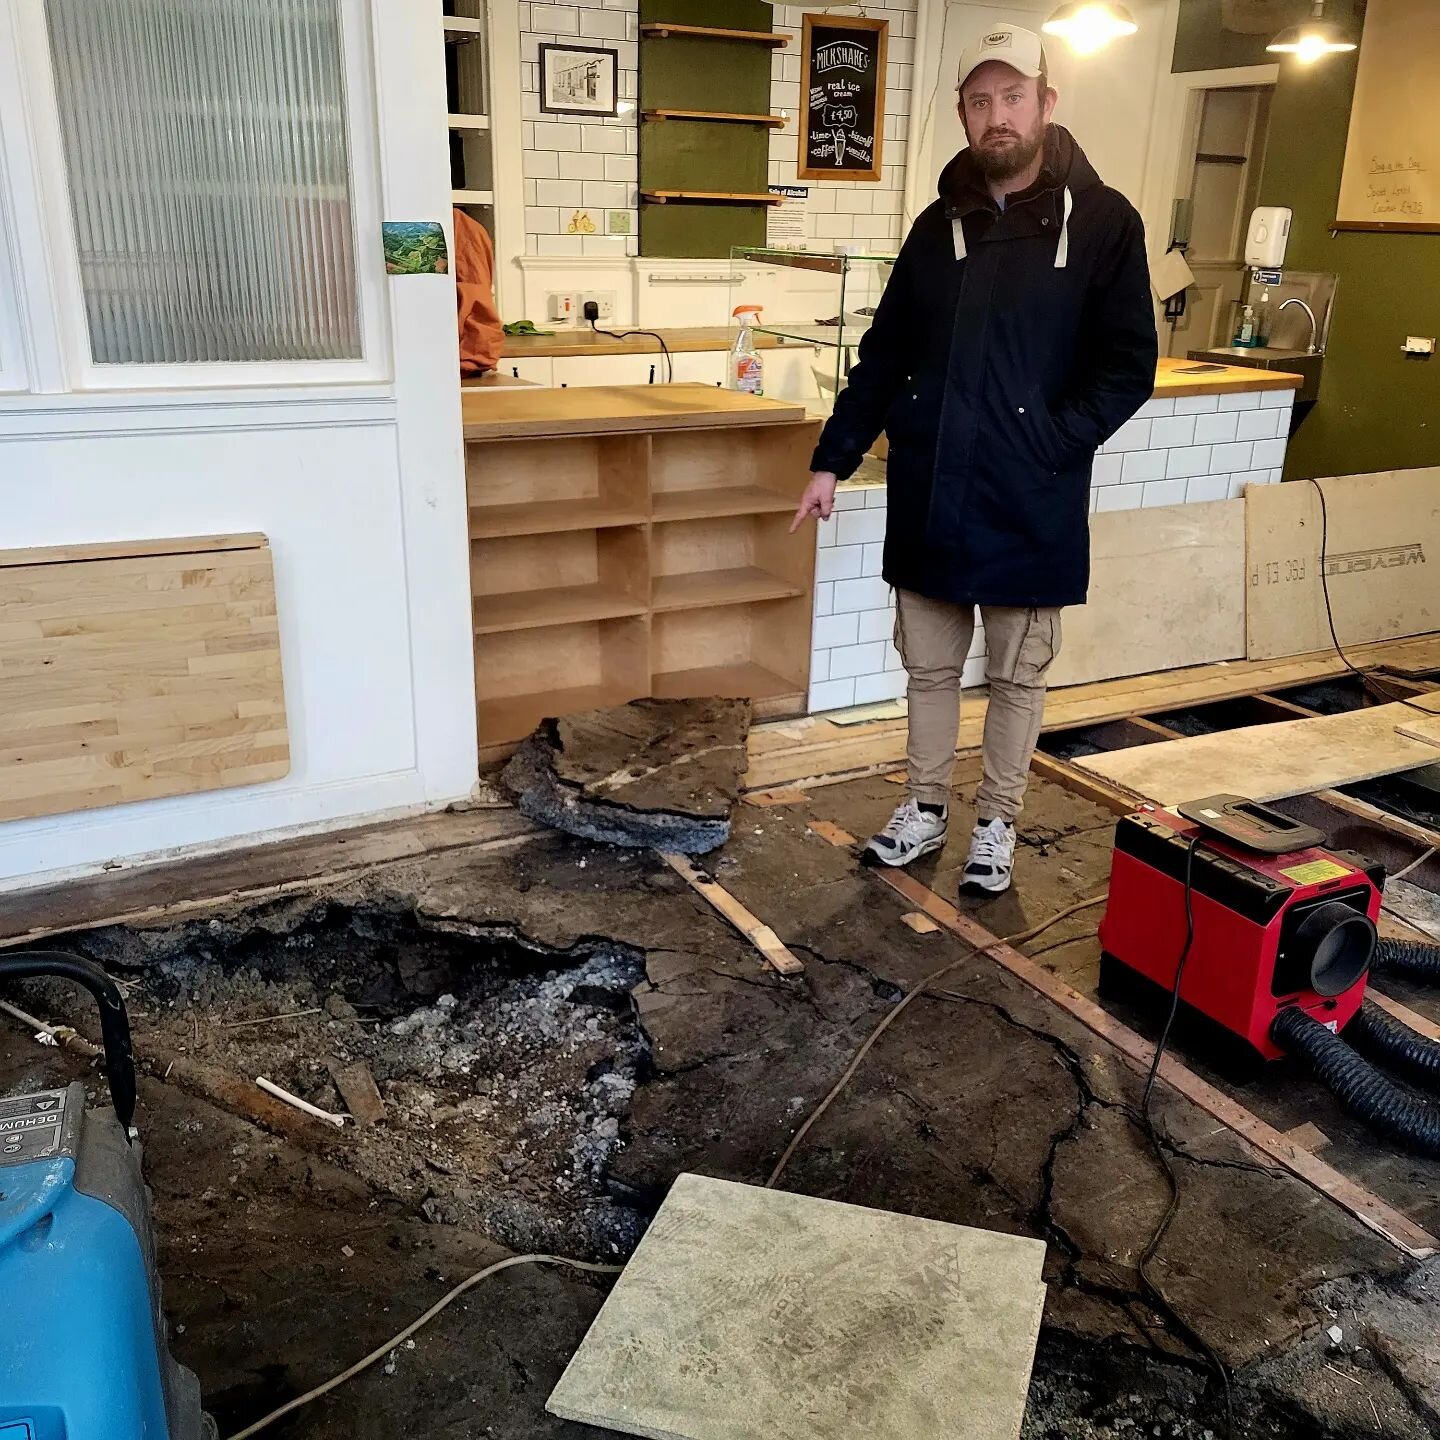 *Update*

So the floor was stripped right back to reveal monumental 'issues' with the concrete base. The water has been leaking for so long the damage beneath the floor is extensive and a far bigger job than expected.

It now means the whole space ne